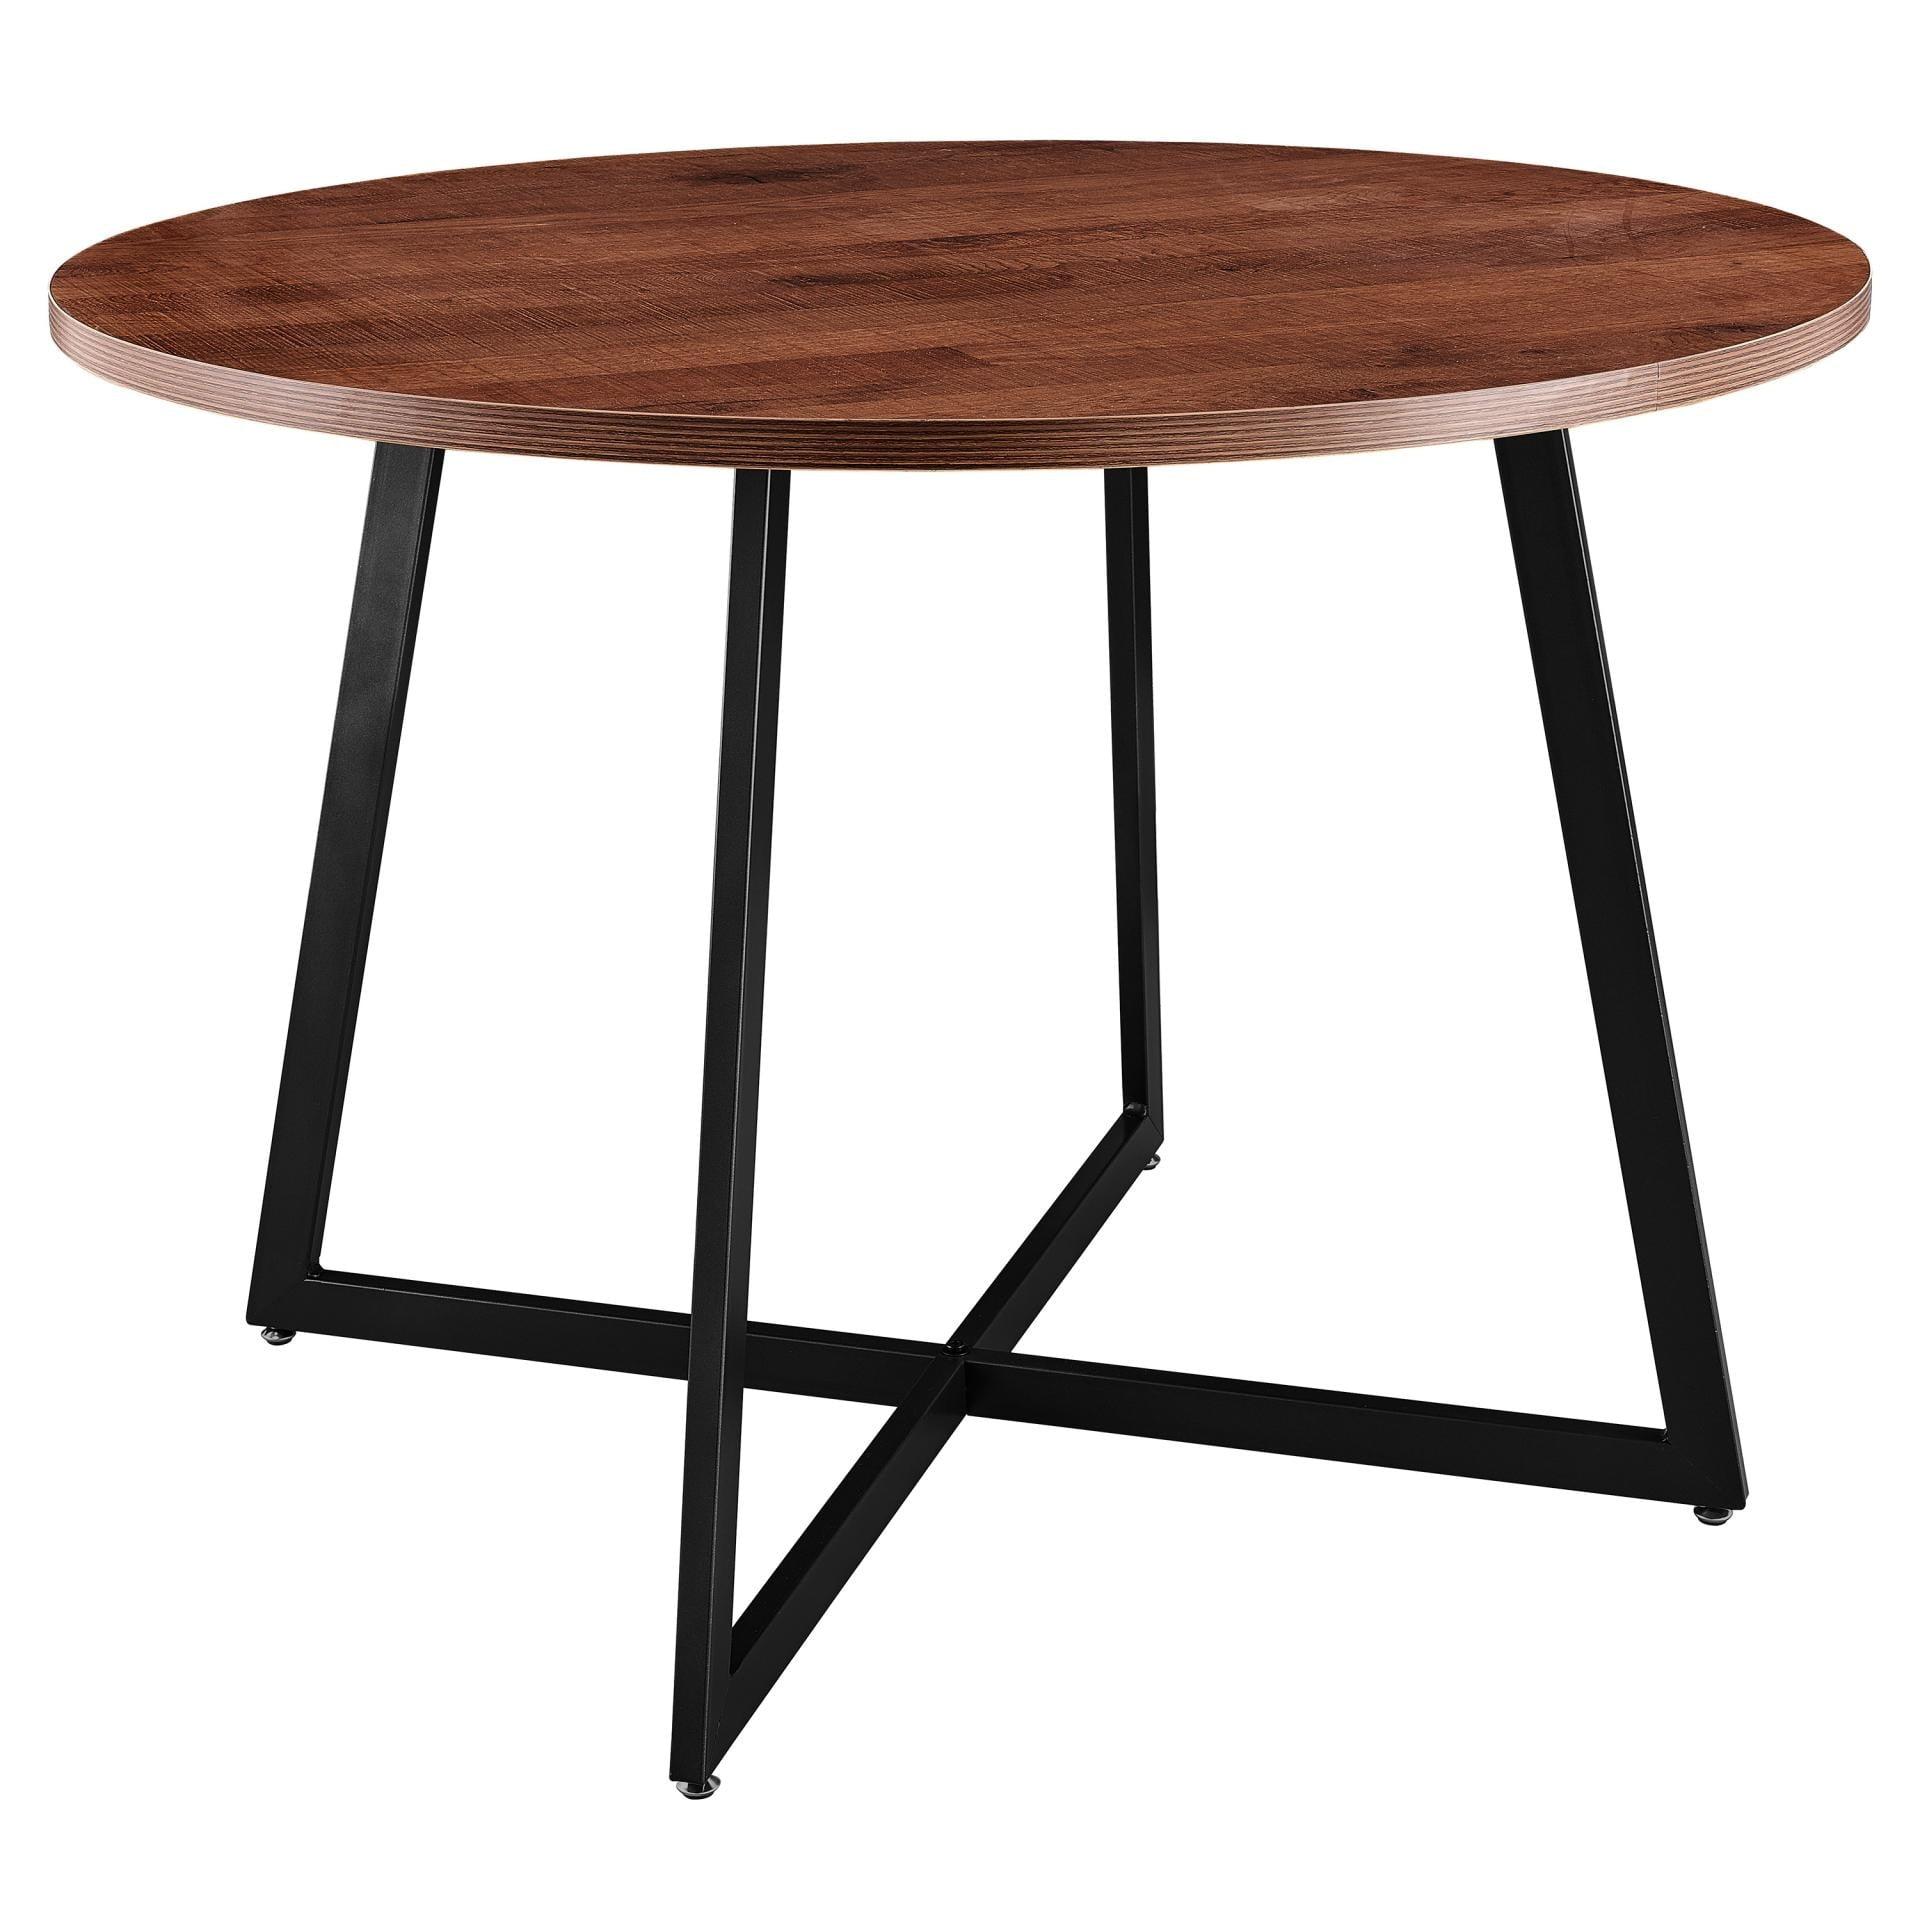 Courtdale Gliese Brown 42" Round Wood Dining Table